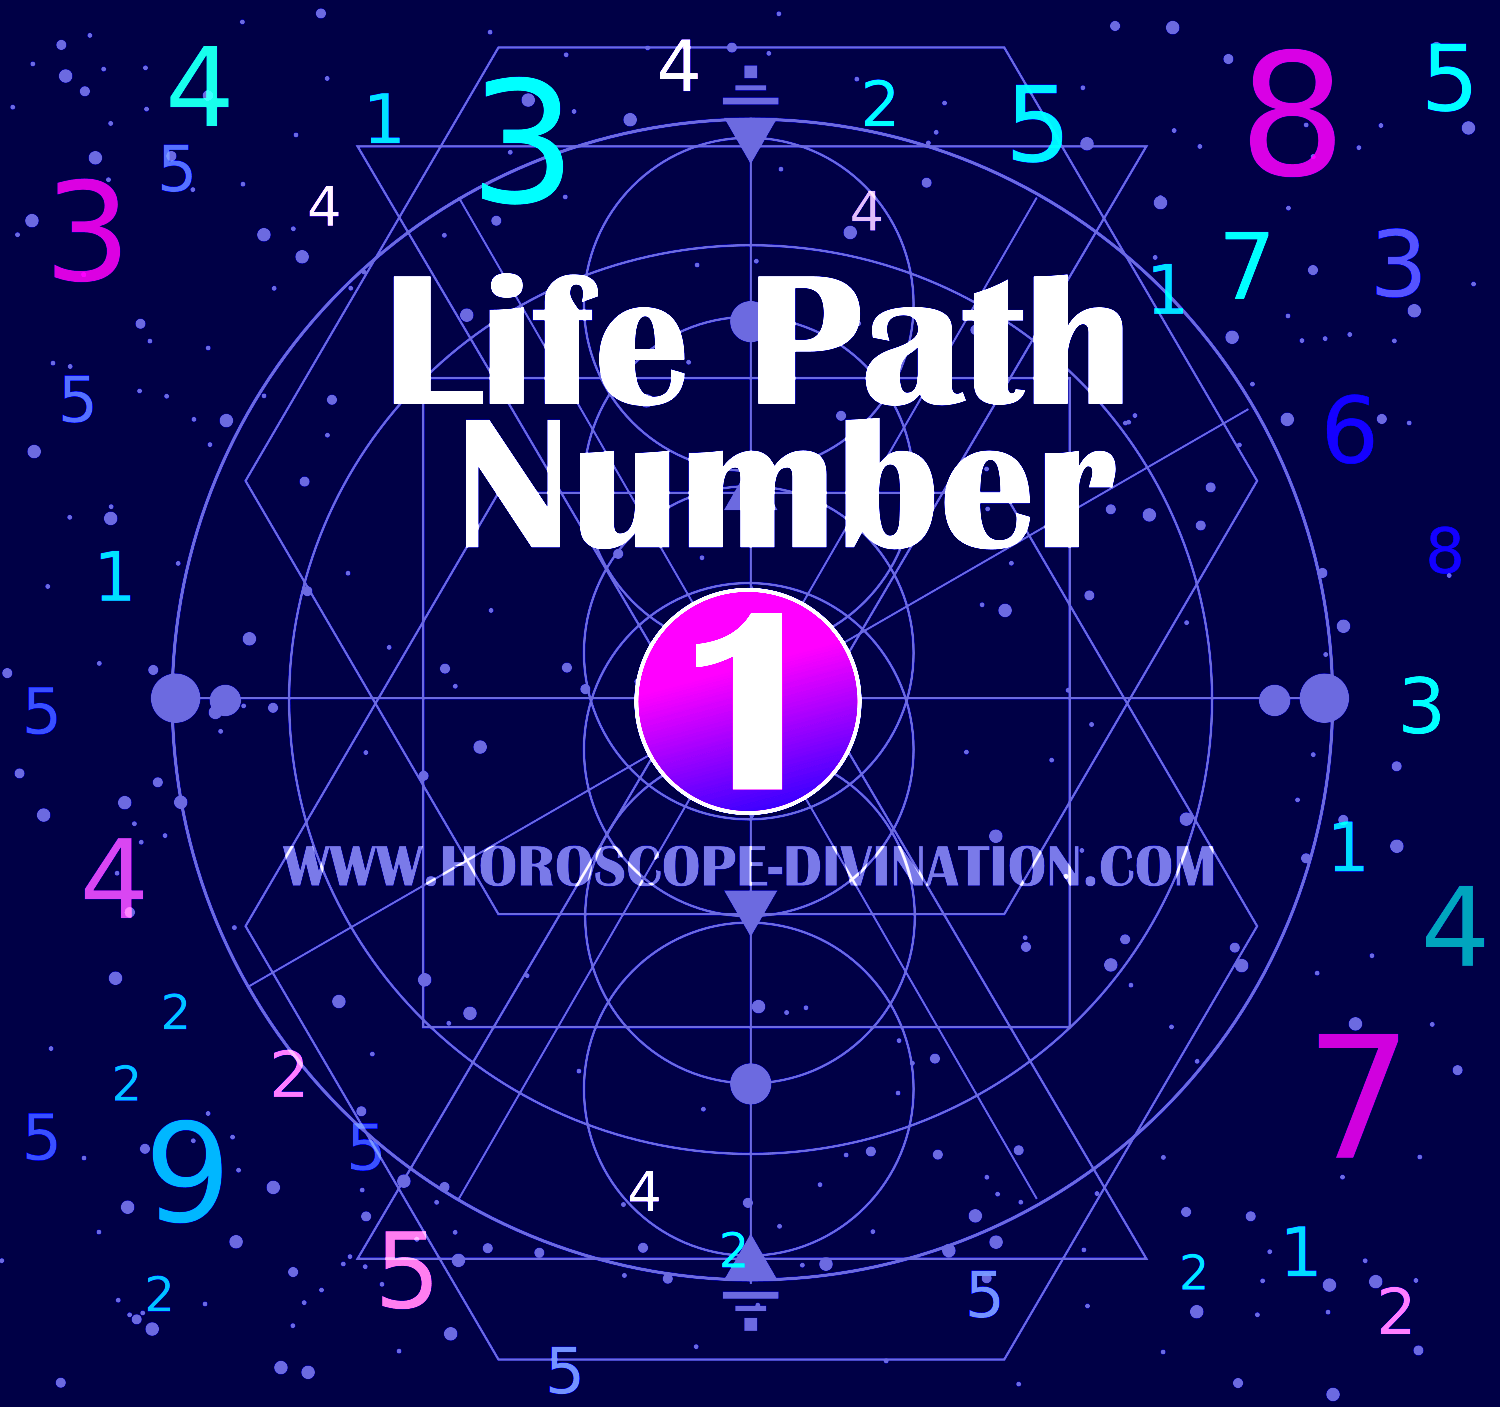 Life Path Number 1 - Numerology